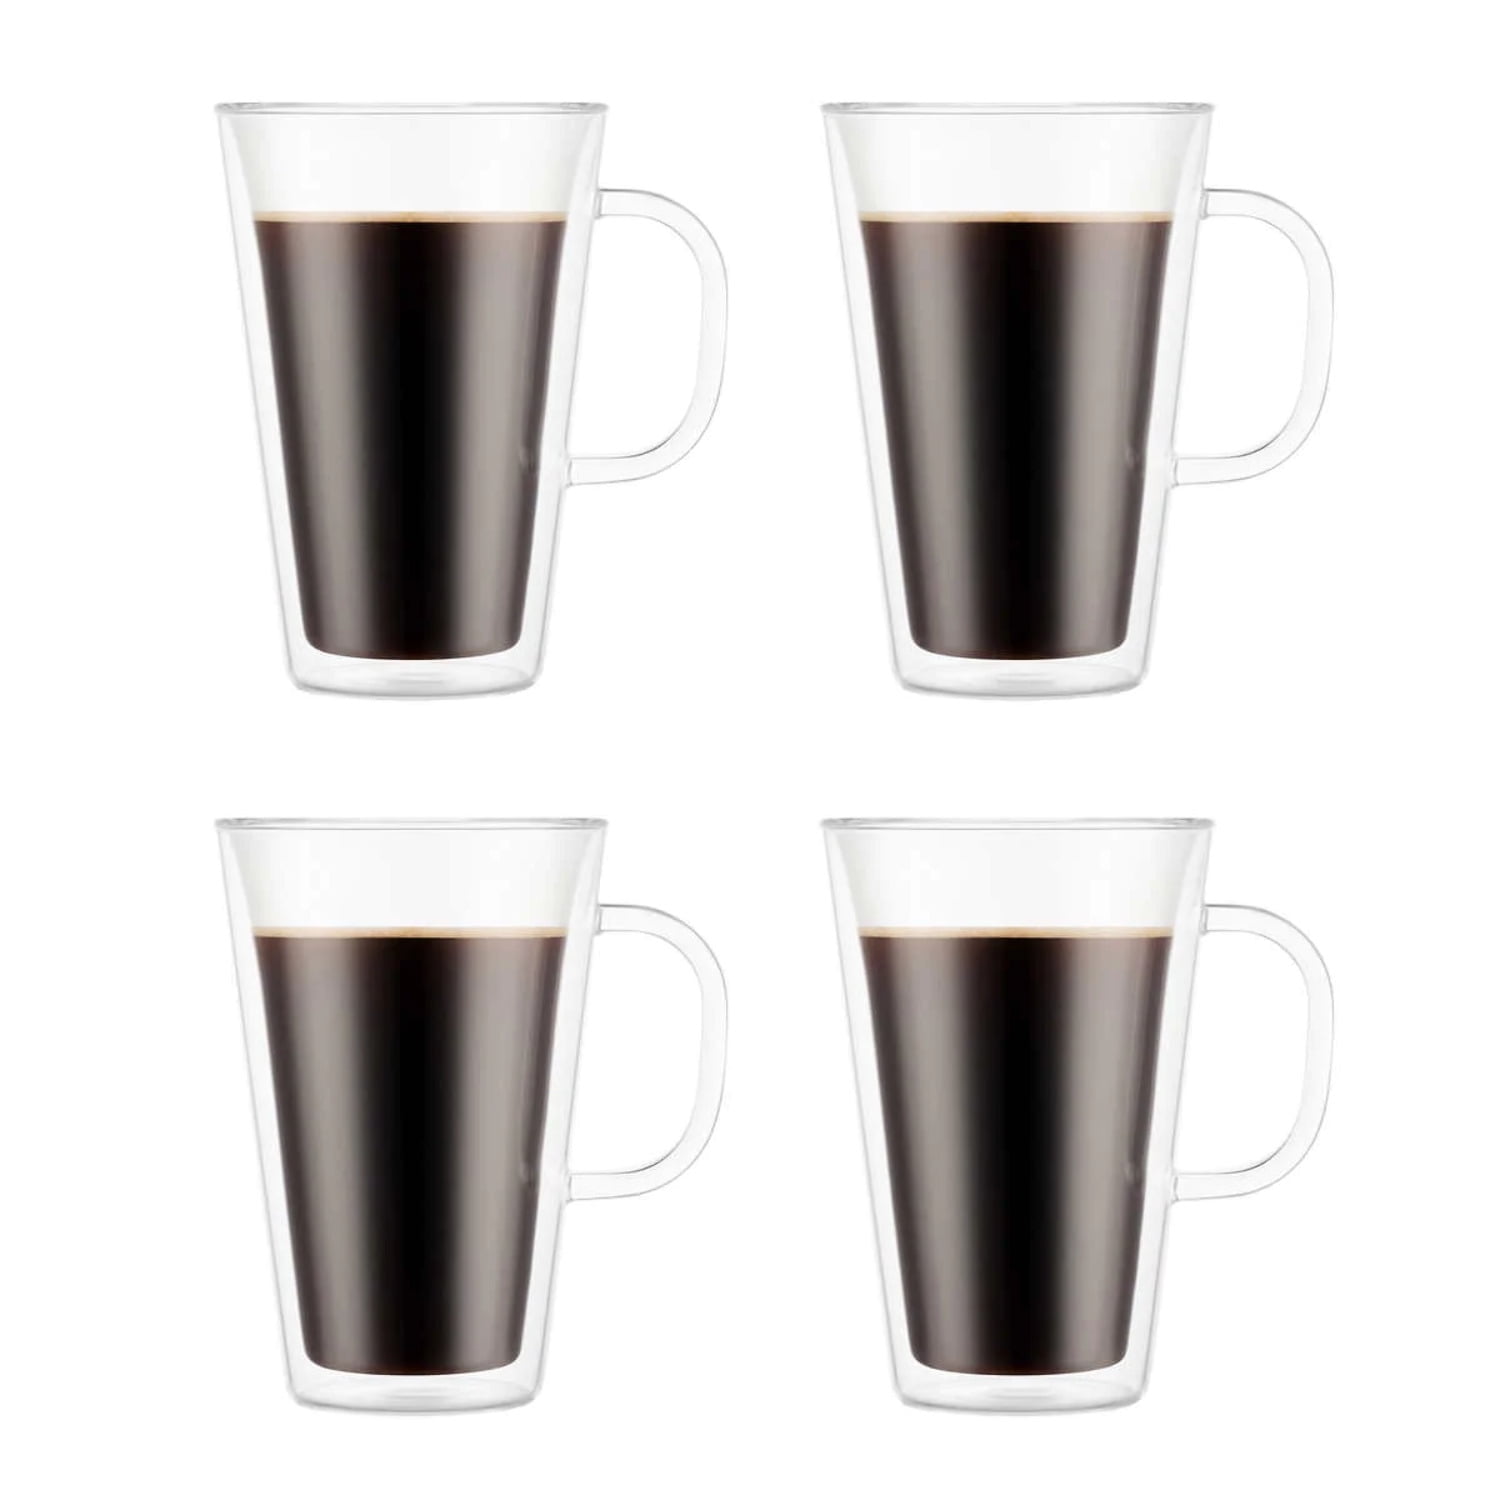 Melior Double Wall Cup, Double Wall Cup